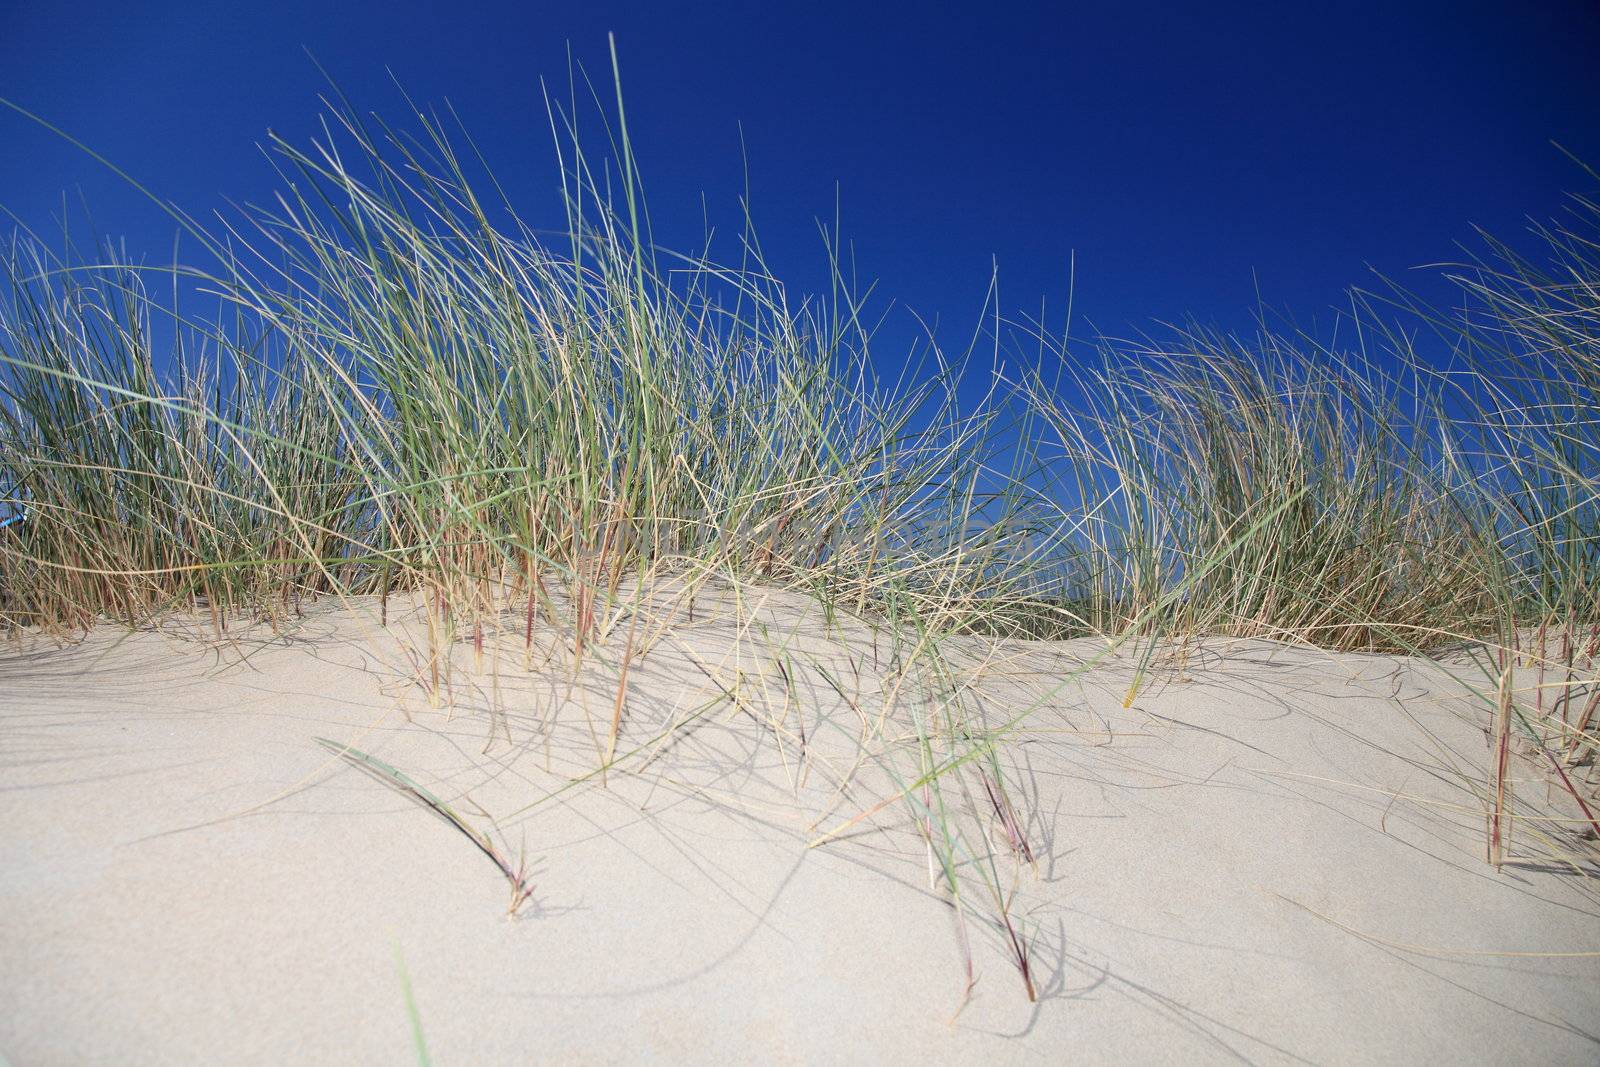 Sand dune in front of bright blue sky.